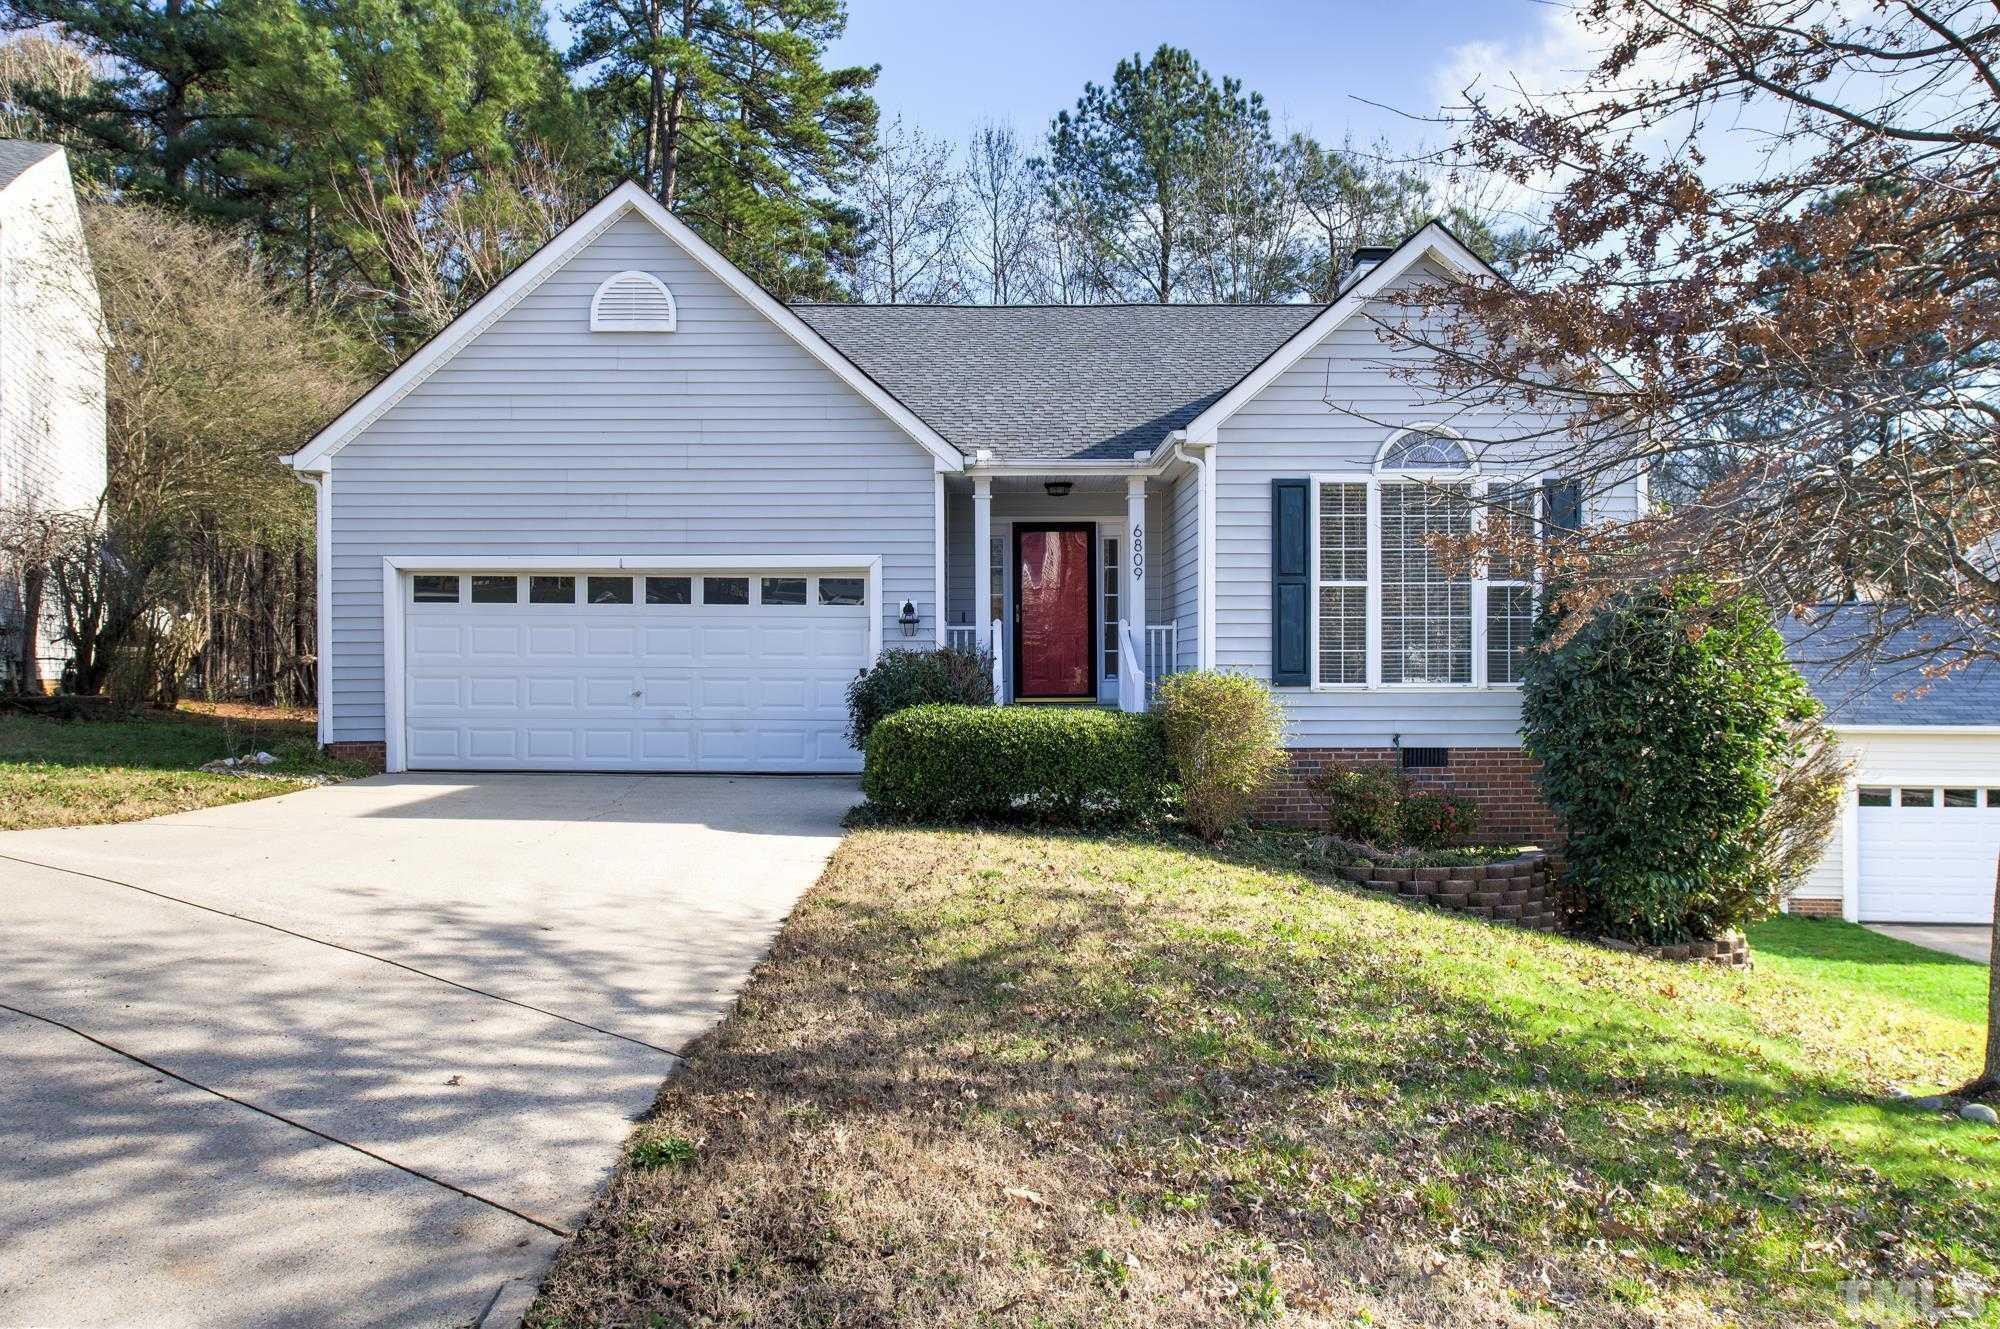 6809 Edwell Court, 2425952, Raleigh, Detached,  for sale, Pamela Andrejev, Realty World - Triangle Living